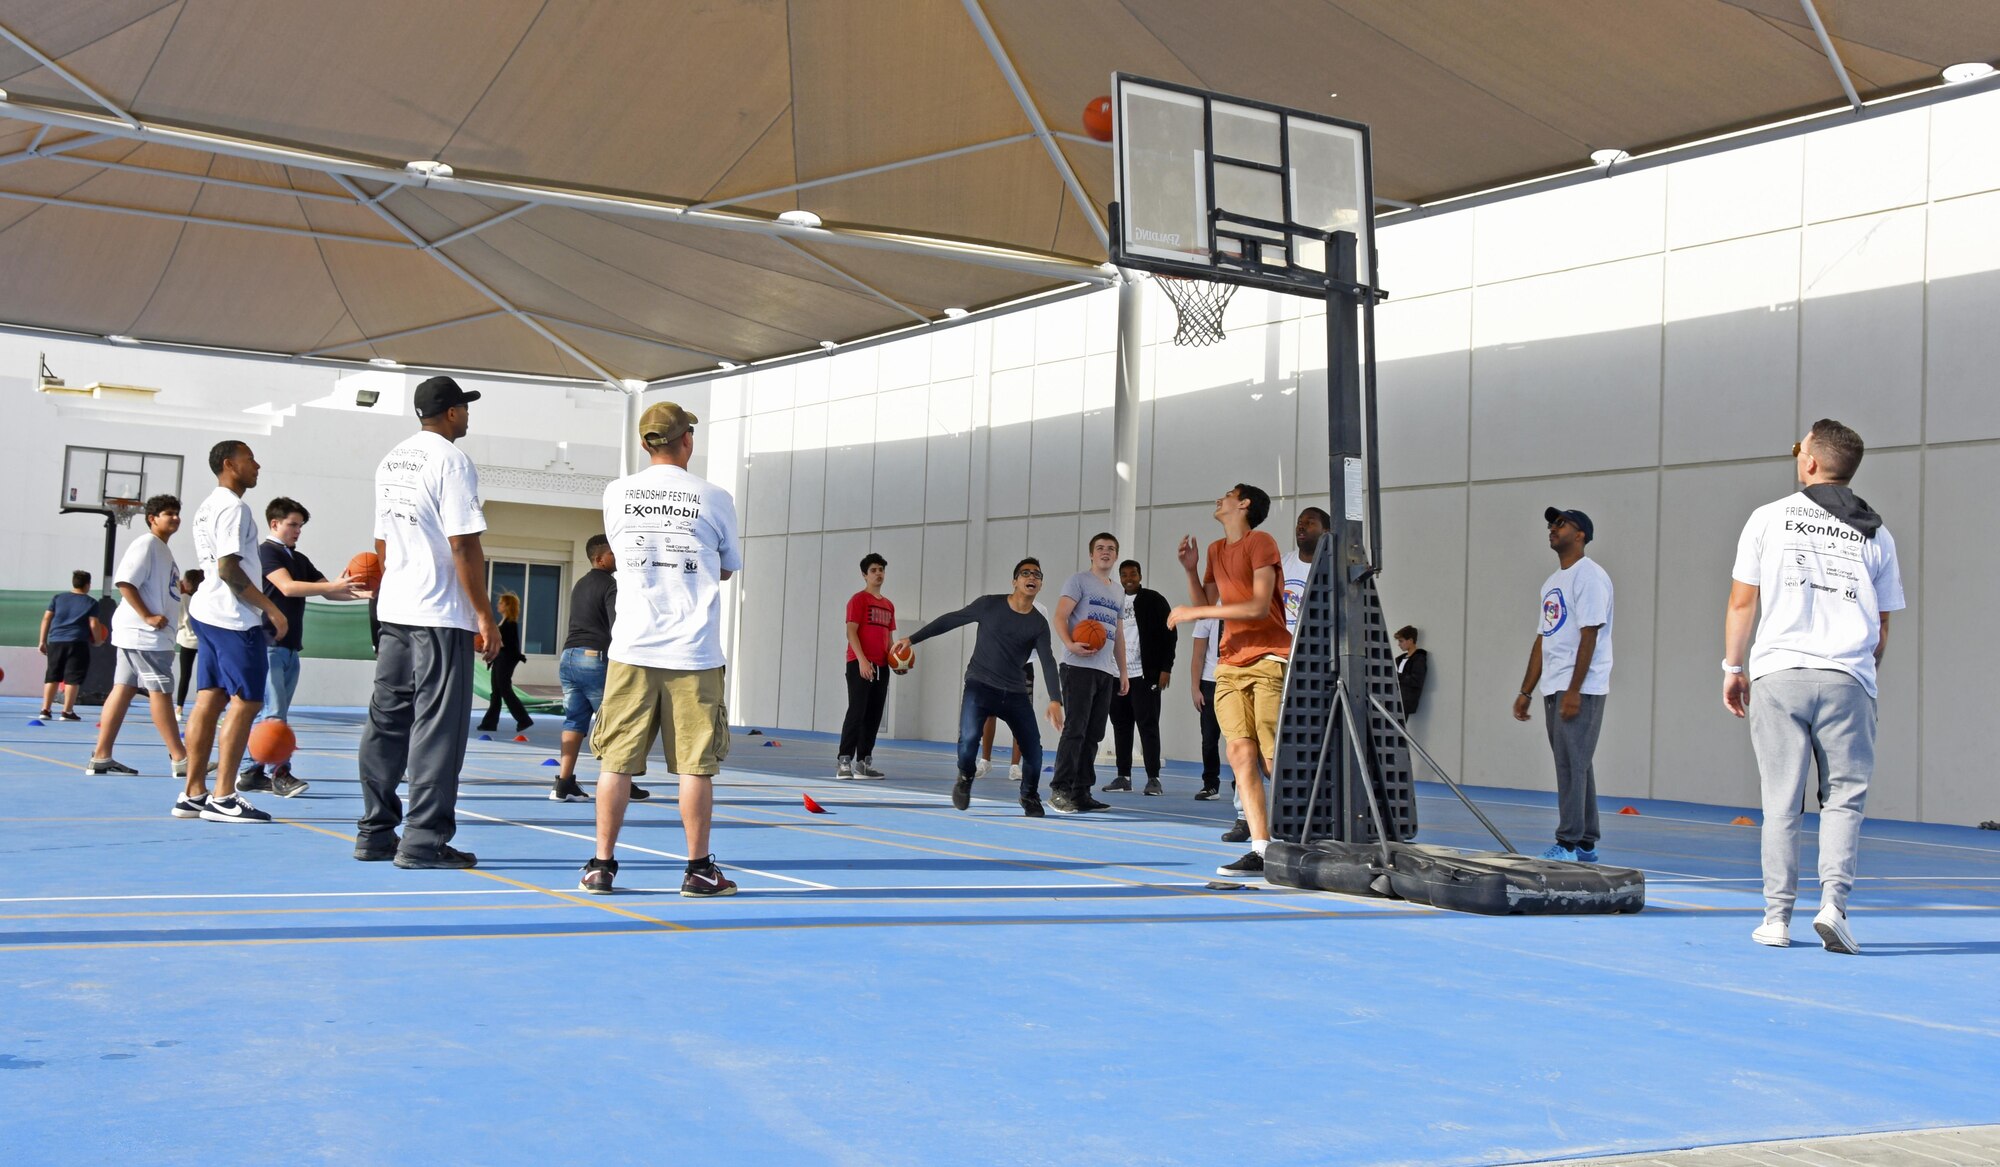 Airmen from Al Udeid Air Base, Qatar, play basketball with students during the annual American School of Doha 2017 Friendship Festival, Feb. 24, 2017. Airmen volunteered to help during the event and were encouraged to interact with ASD students, parents and staff, as well as local business owners and the many visitors who attended the festival. (U.S. Air Force photo by Senior Airman Cynthia A. Innocenti)